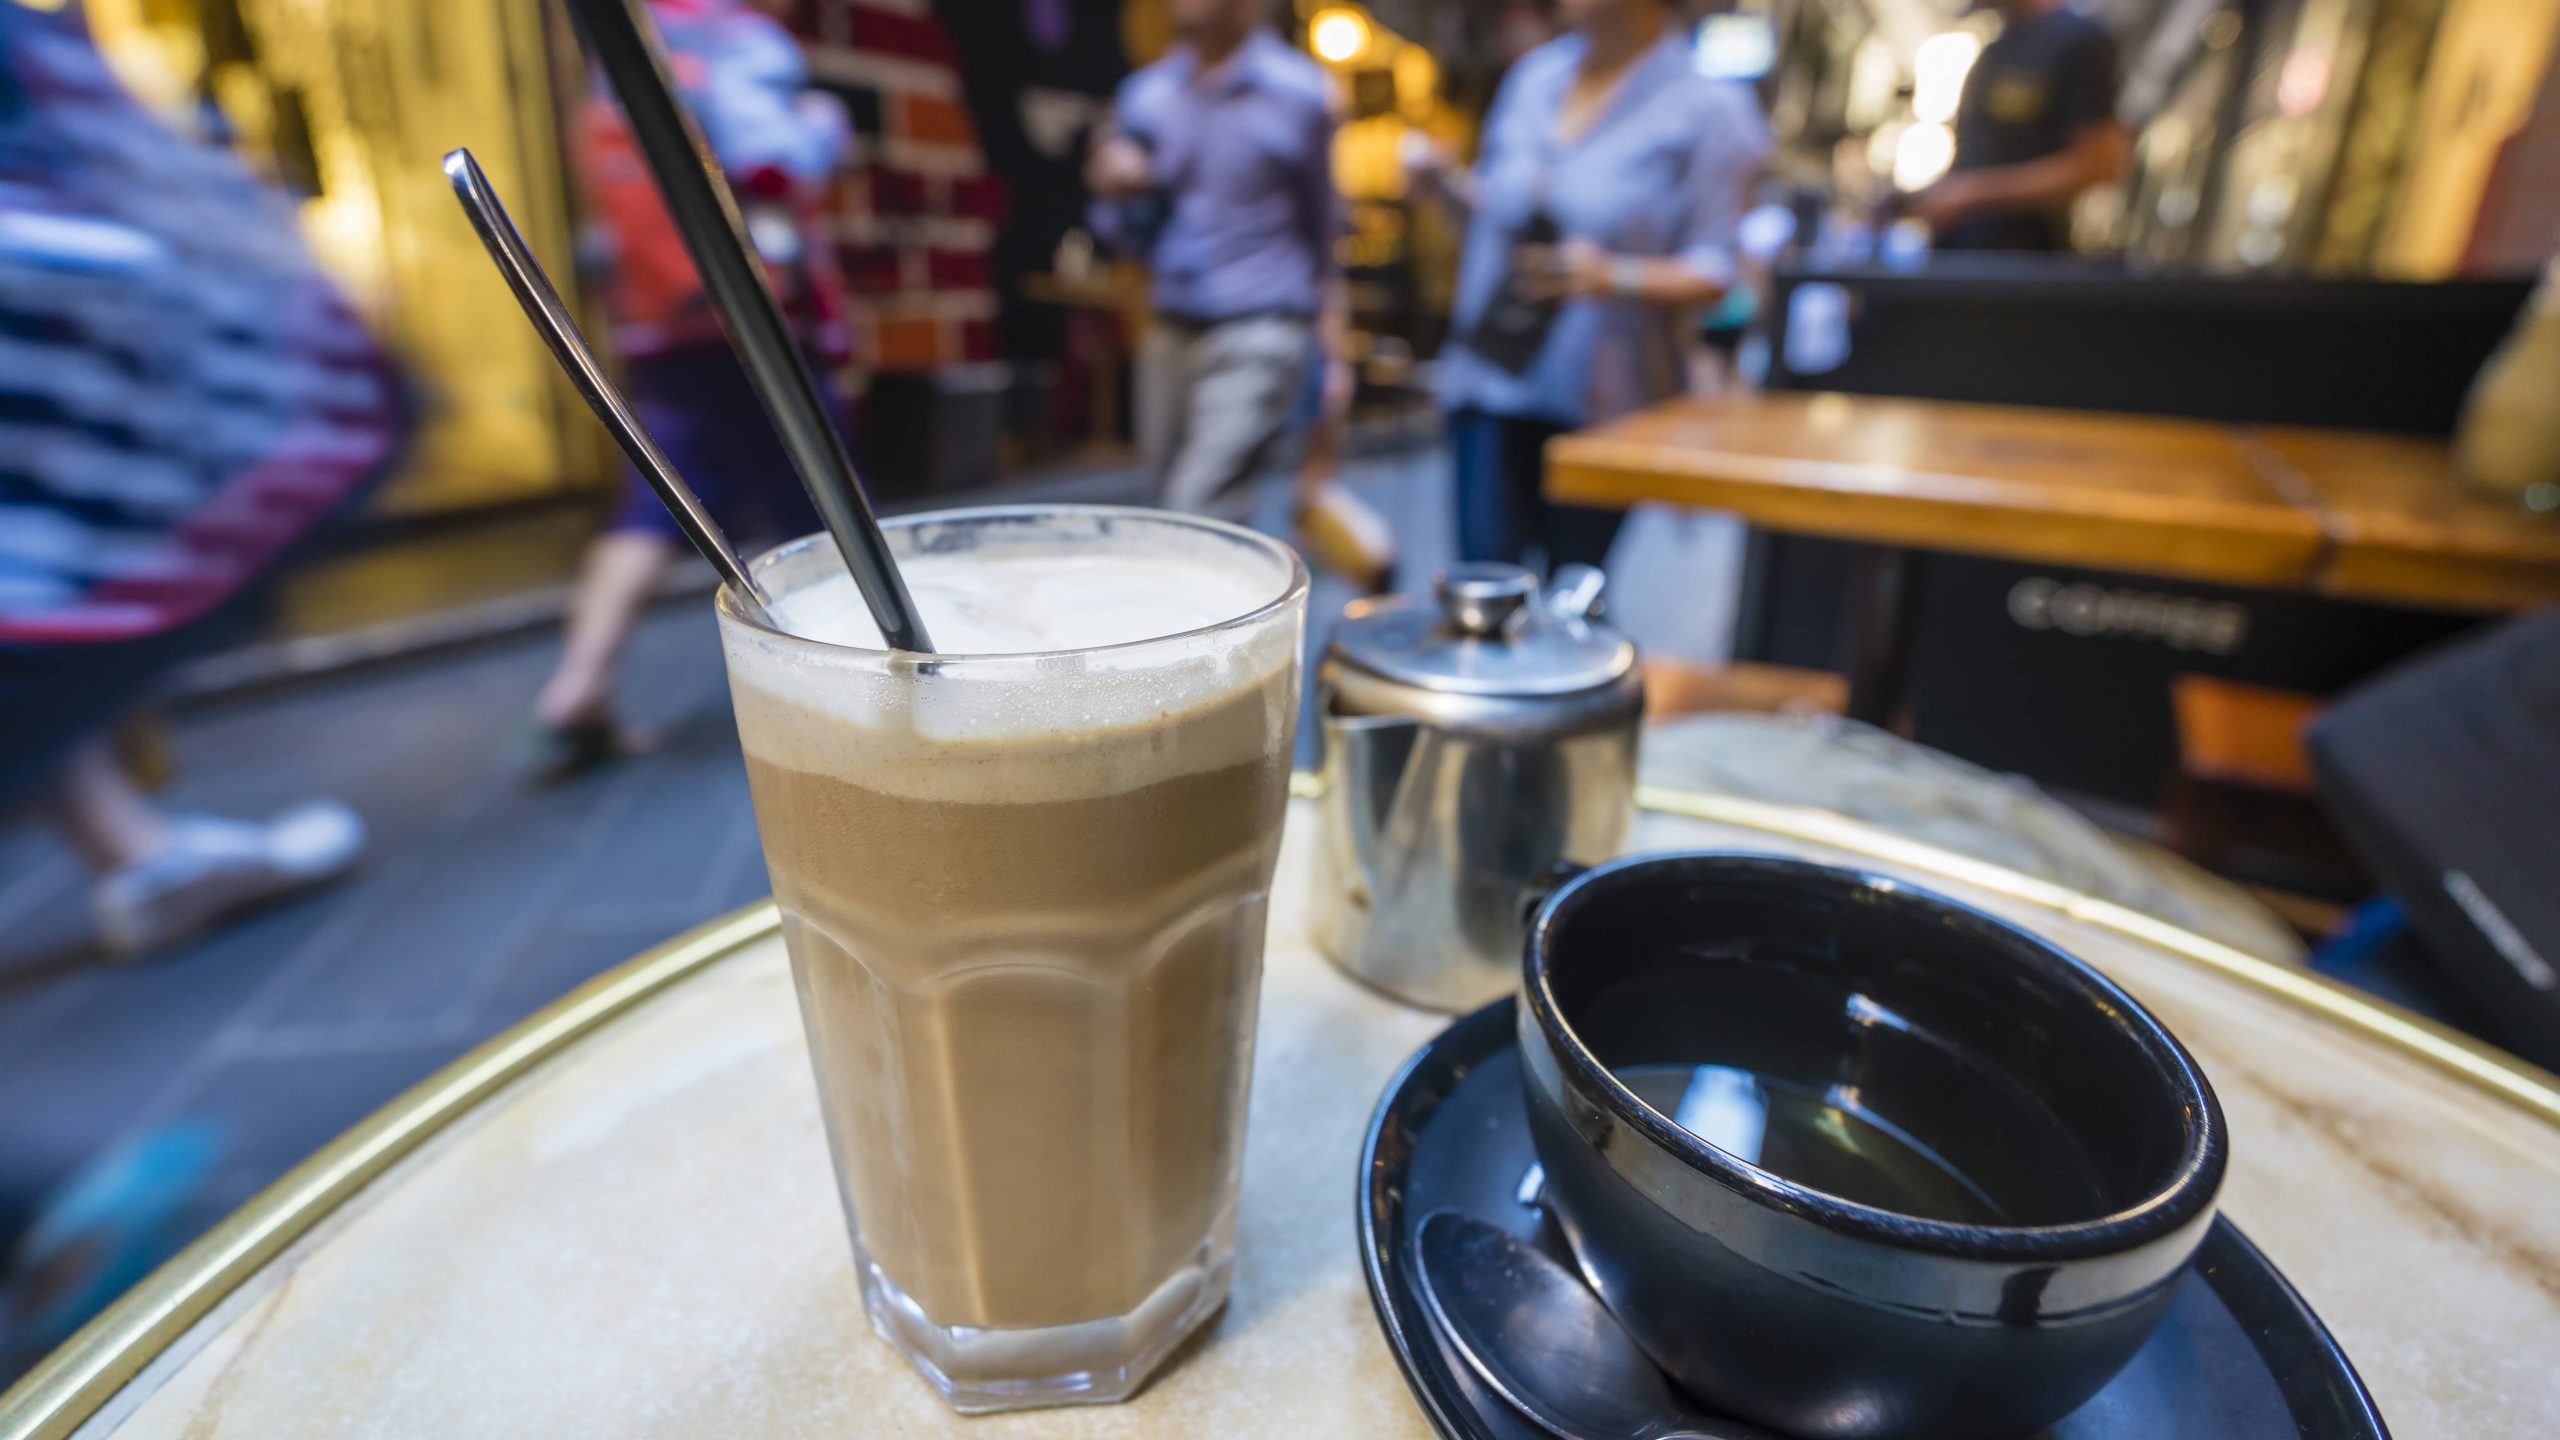 Where To Travel In Order To Find The World's Best Coffee – Big 7 Travel